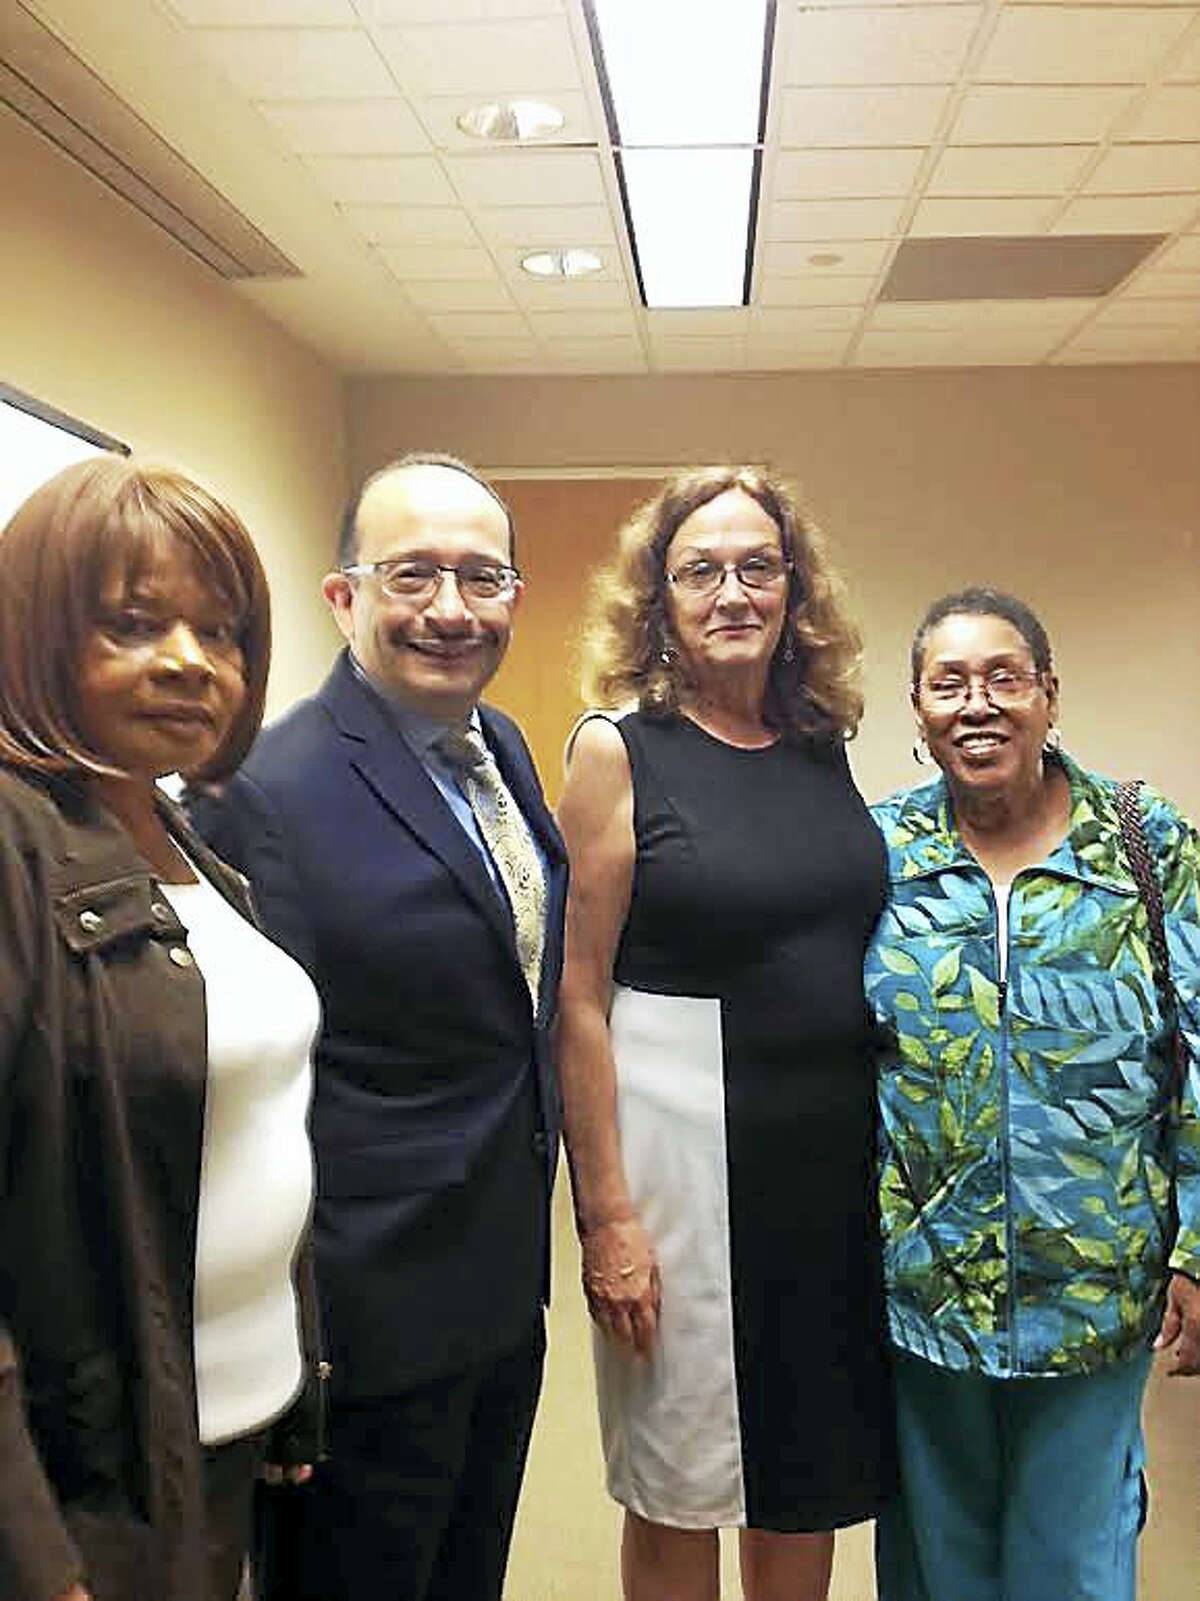 The Commission on Equal Opportunities has hired Angel Fernandez-Chavero, second from left, as its acting executive director. From left is commissioner Edith Rawls, former interim executive director Lila Snyder and commissioner Gwen Newton.